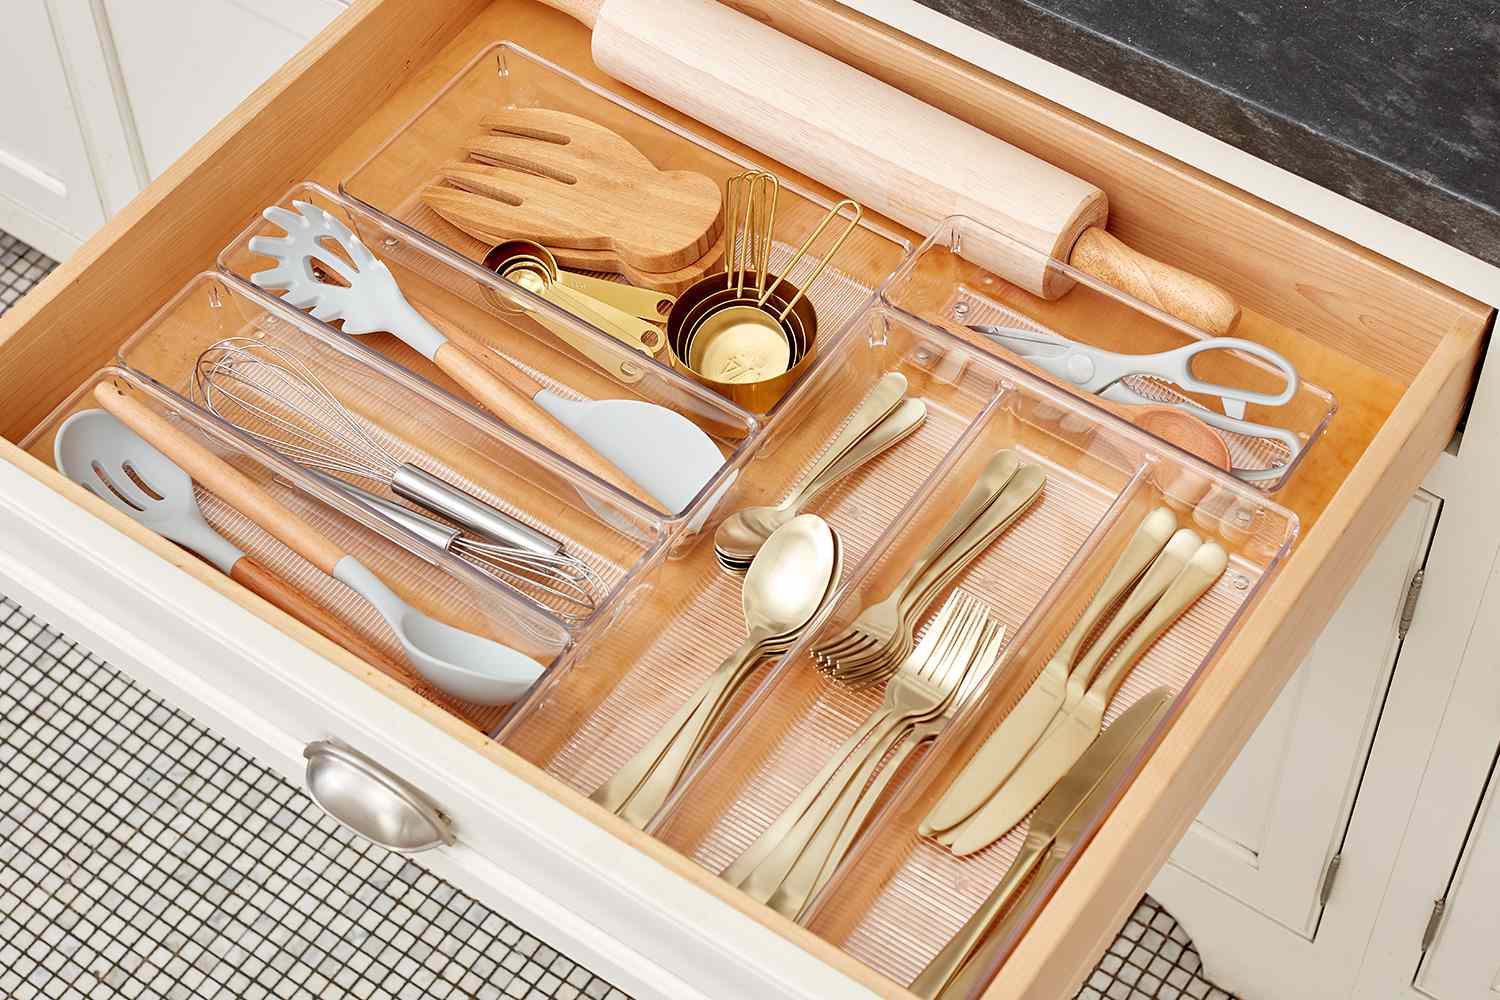 How Should Flatware And Utensils That Have Been Cleaned And Sanitized Be Stored